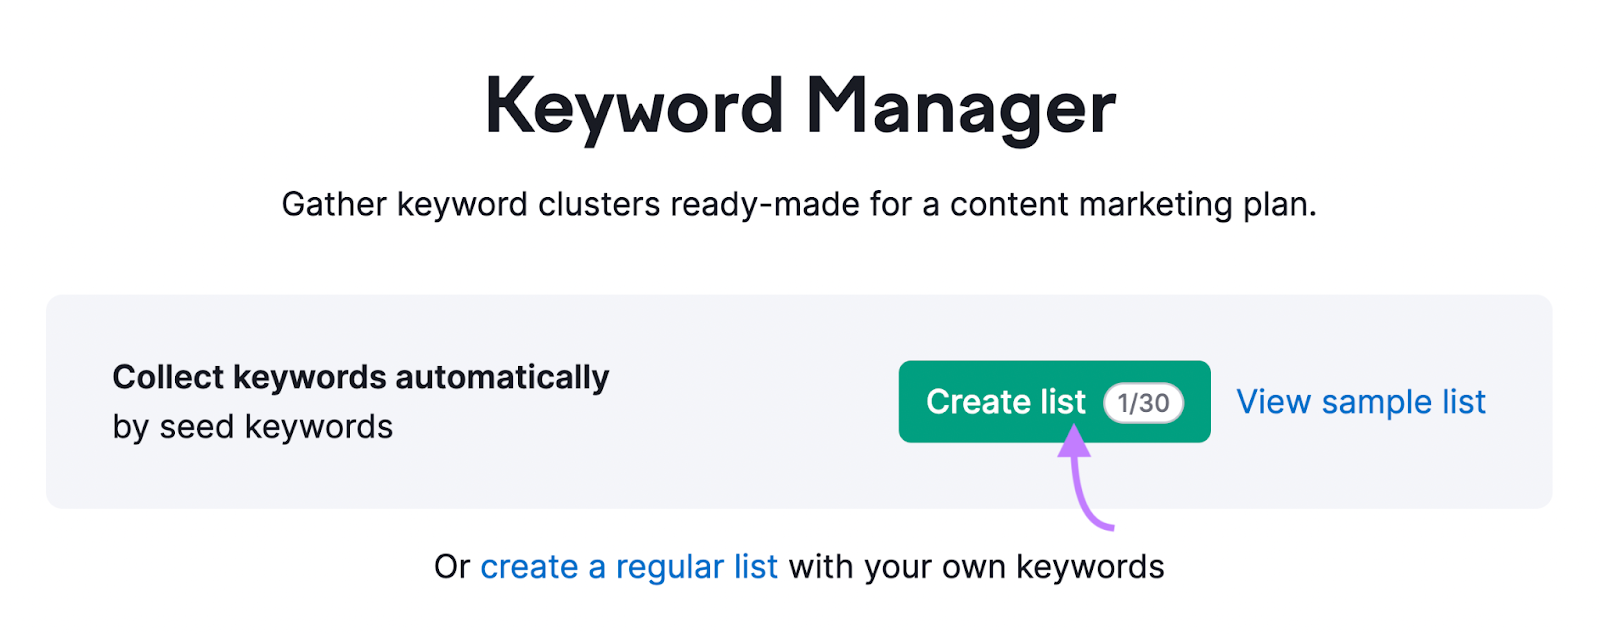 “Create list" button selected under Keyword Manager tool